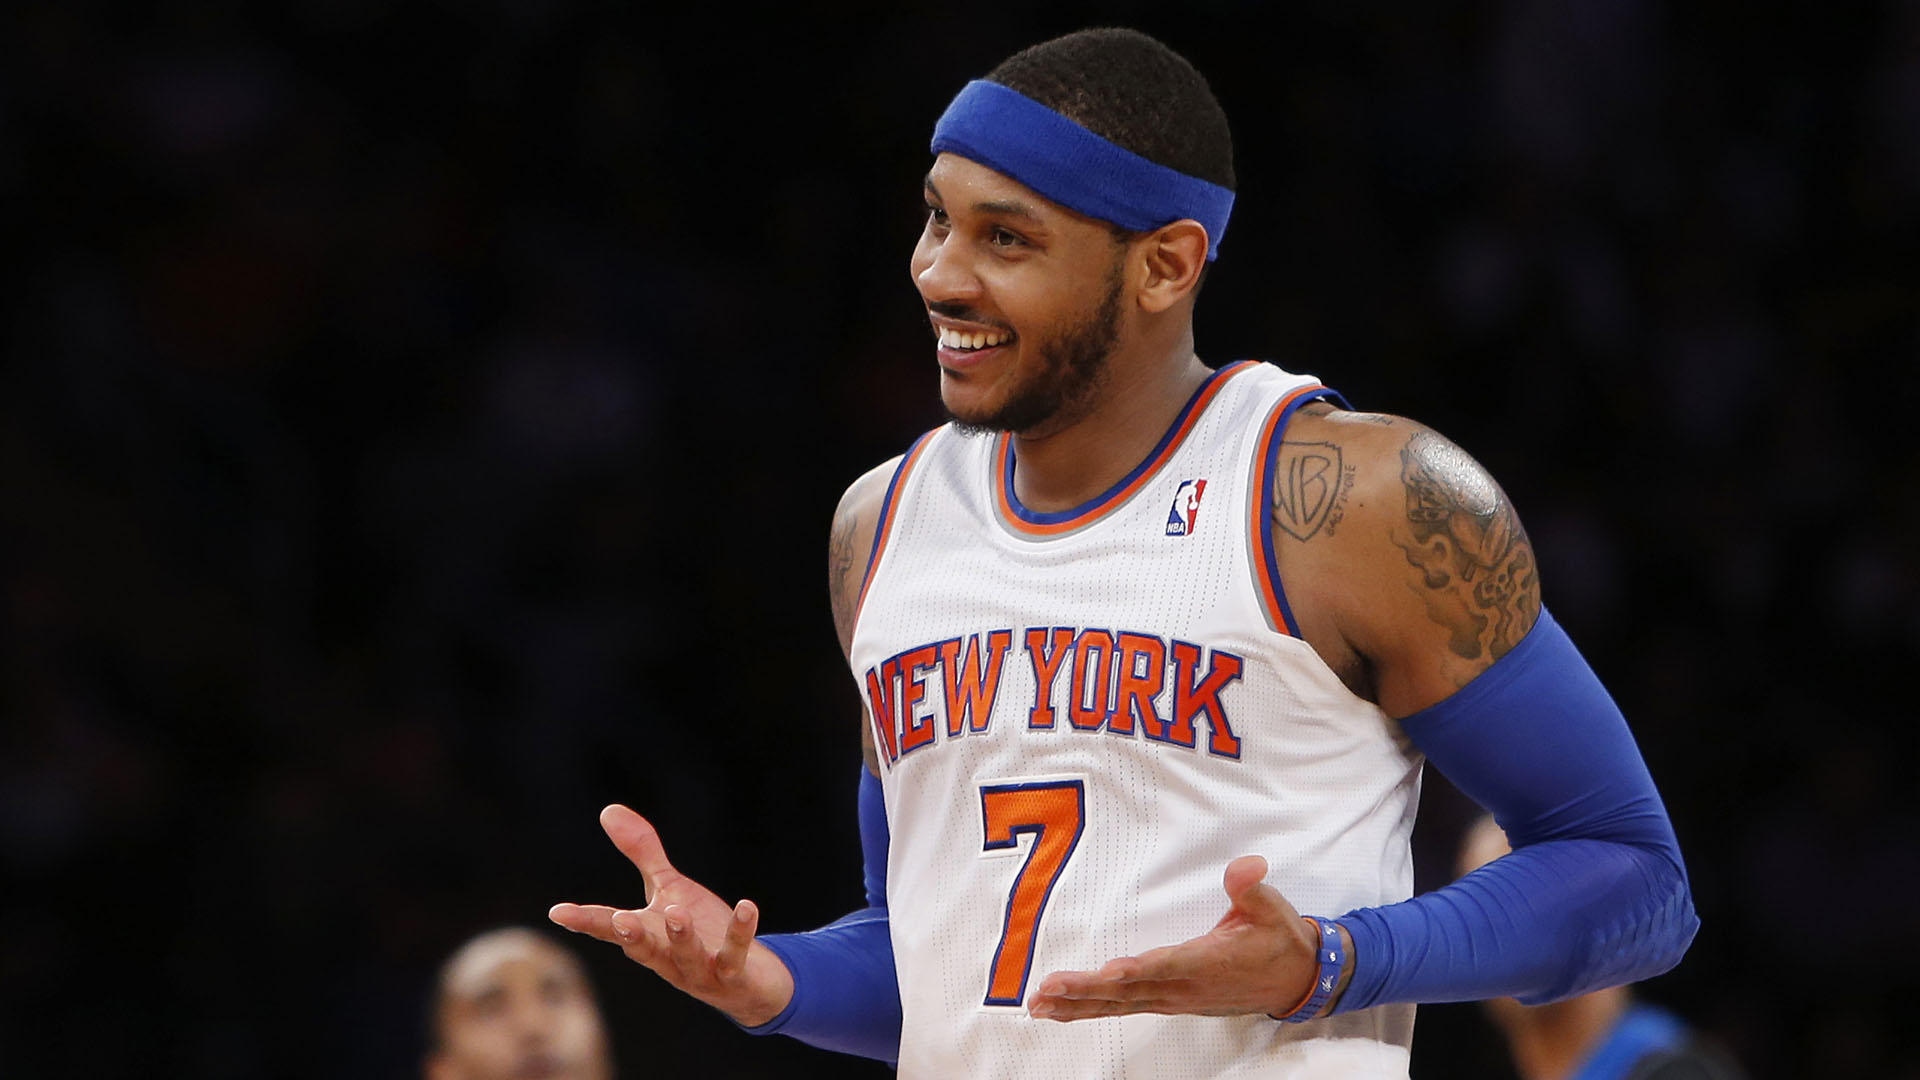 carmelo anthony wallpaper hd,basketball player,player,jersey,team sport,sports